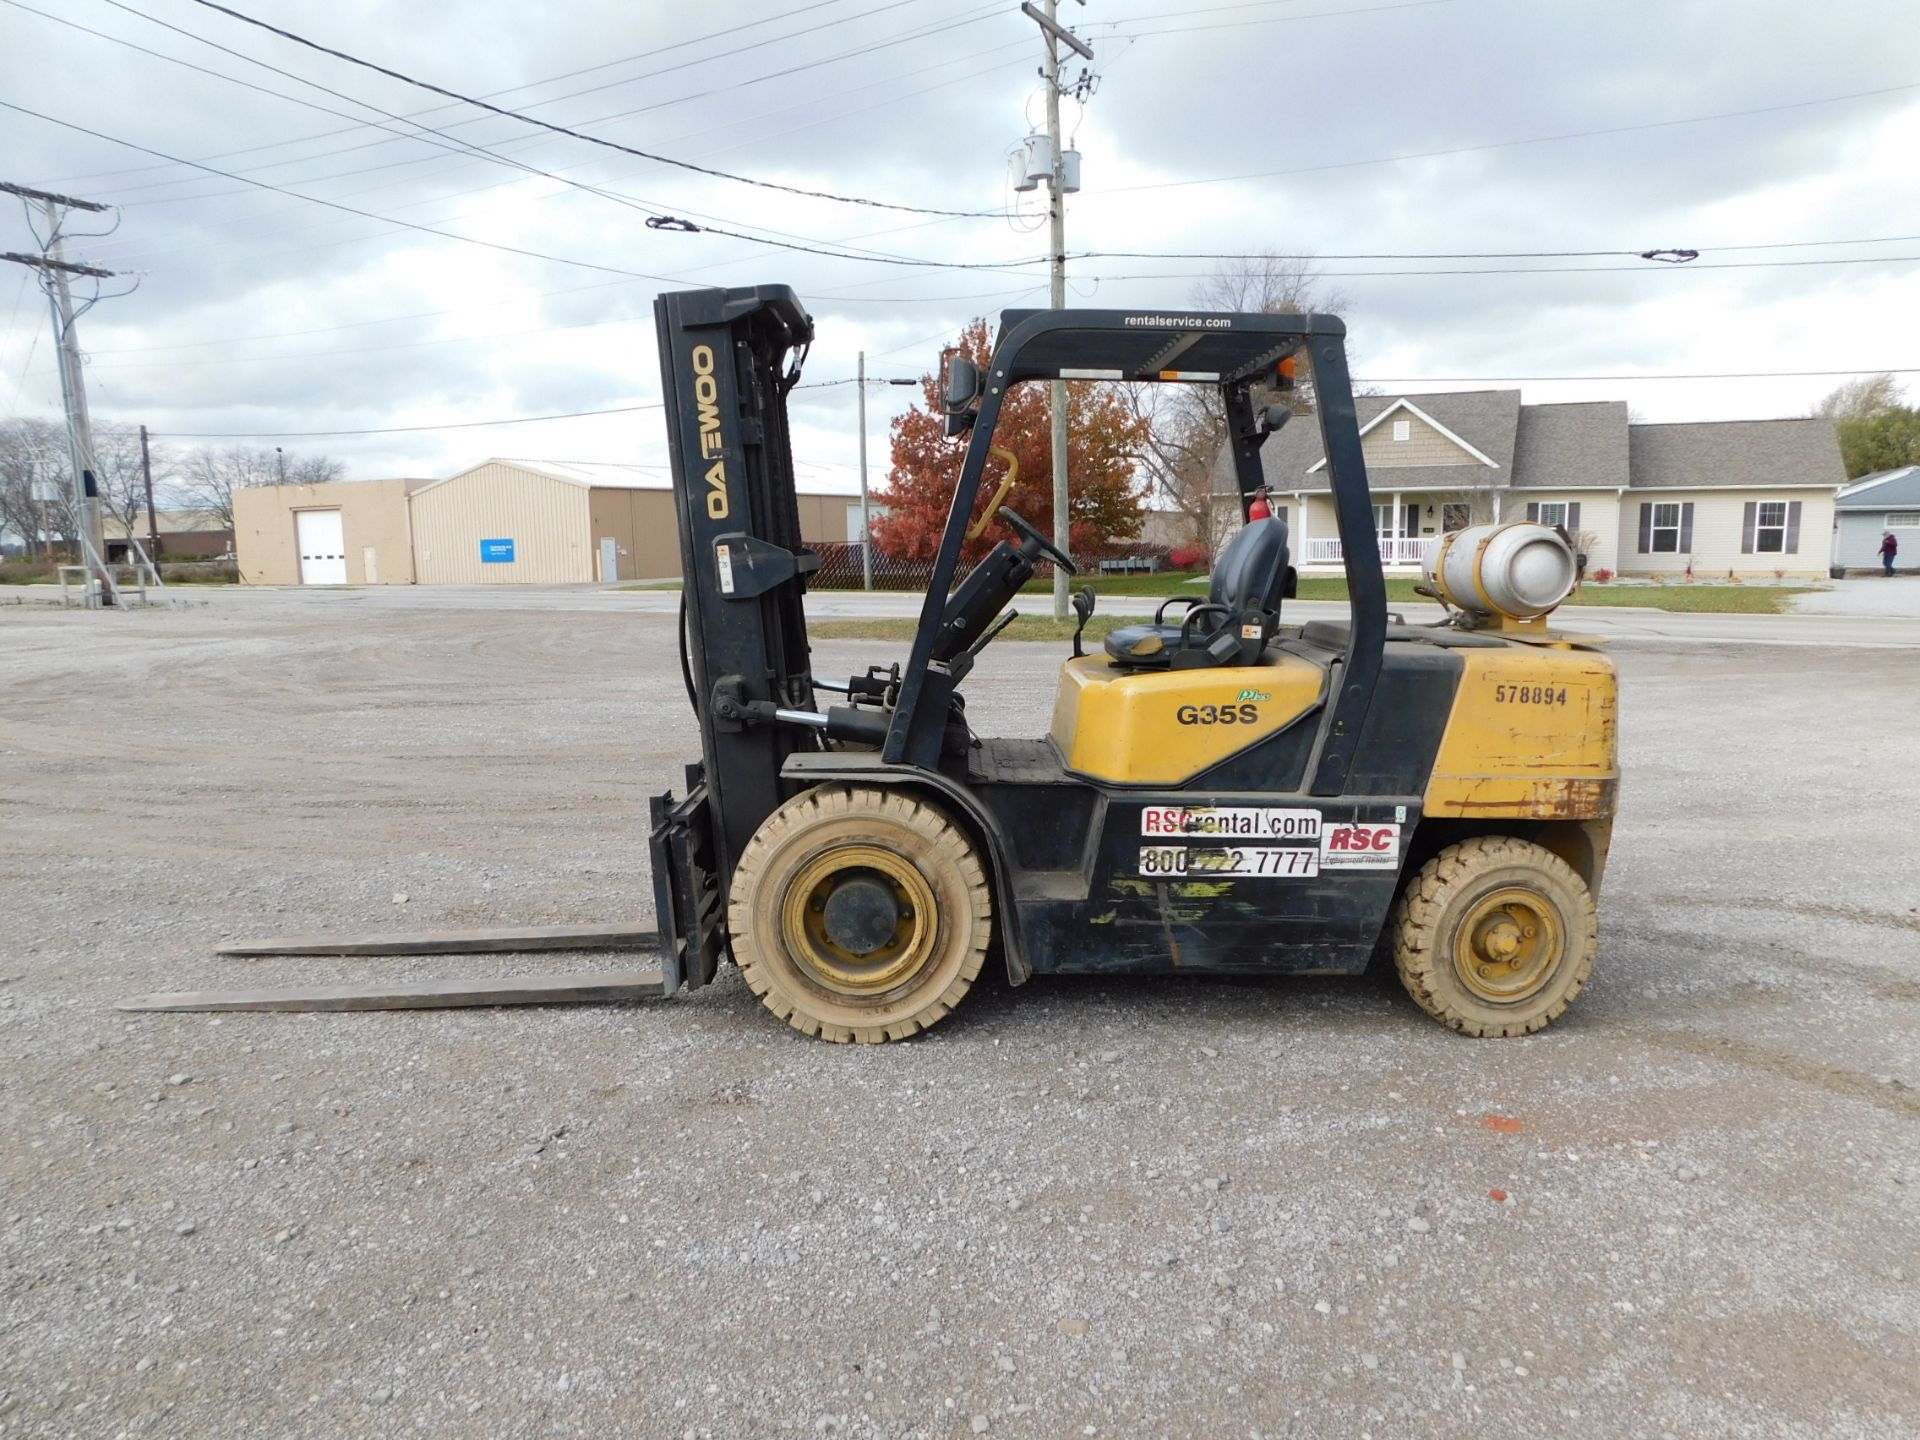 Daewoo Model G35S-2 Forklift, SN G2-00191, 6,700 lb. cap., LP, Solid Pneumatic Non-Marking Tires, - Image 3 of 20